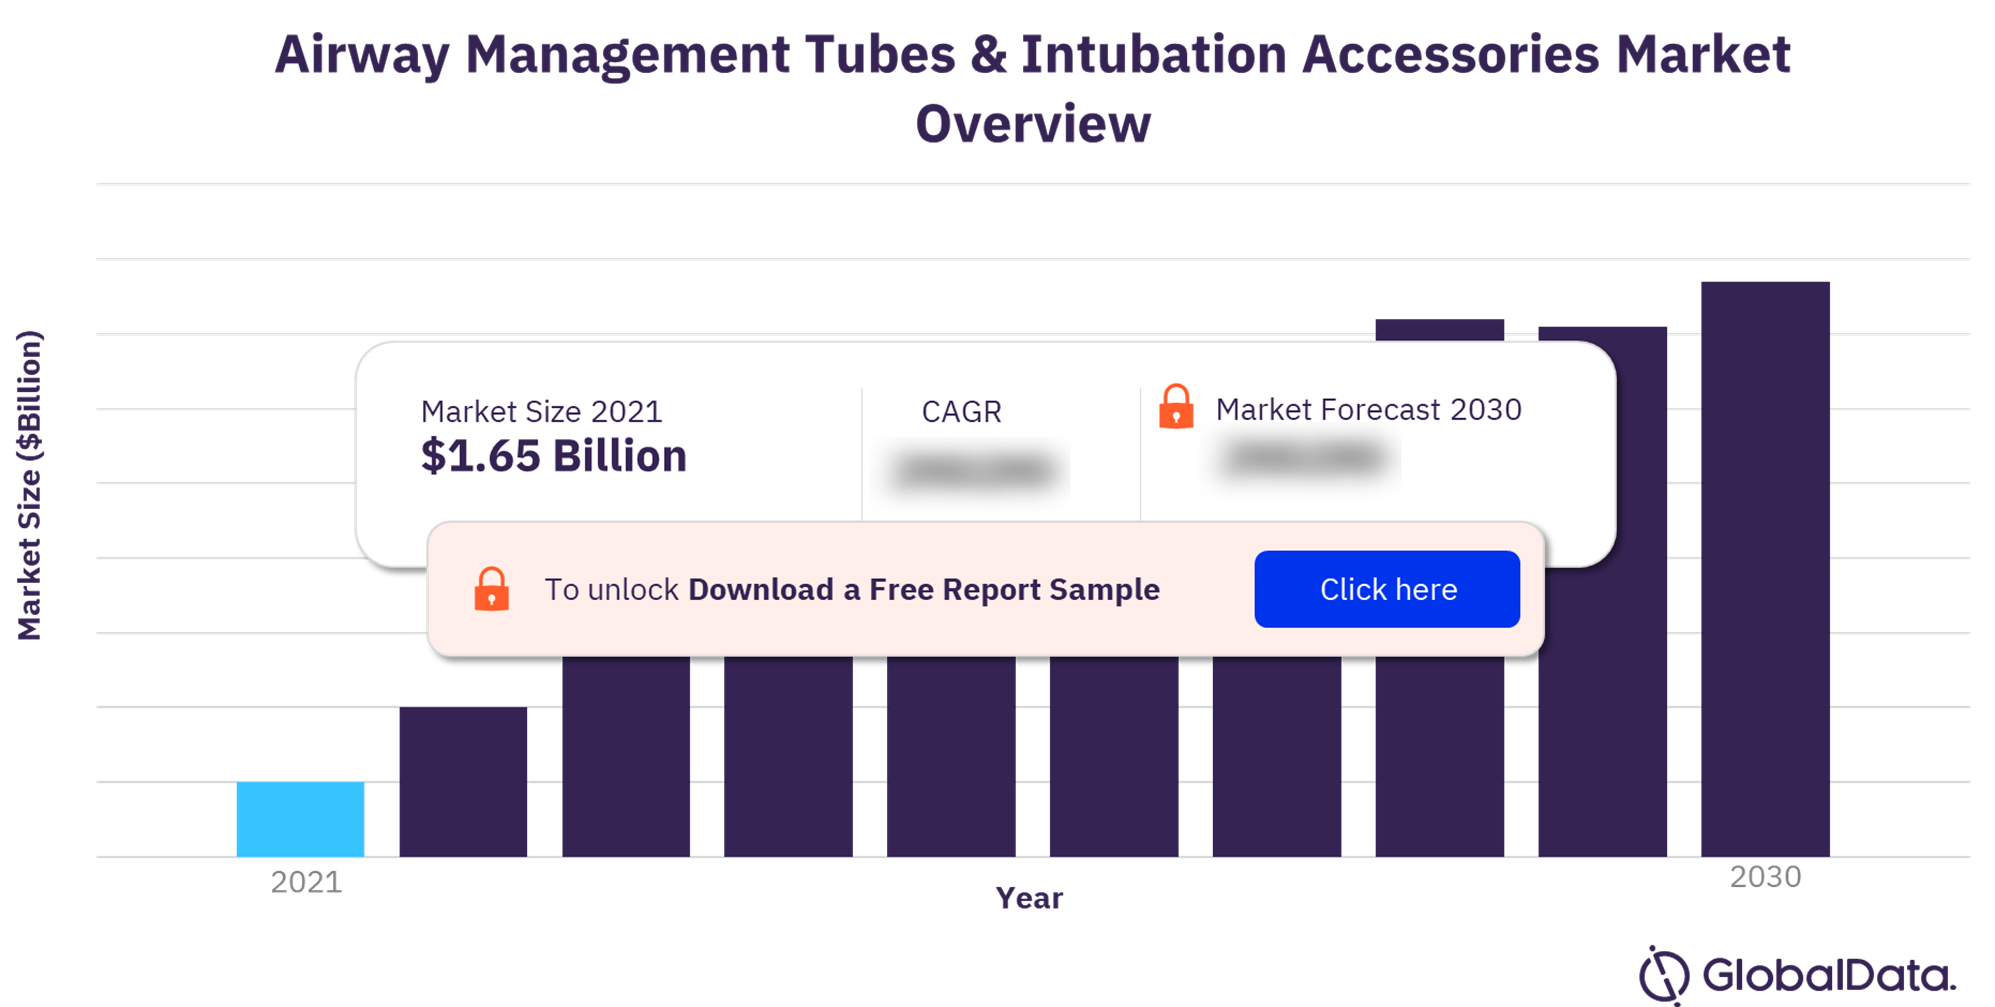 Airway Management Tubes & Intubation Accessories Market Outlook